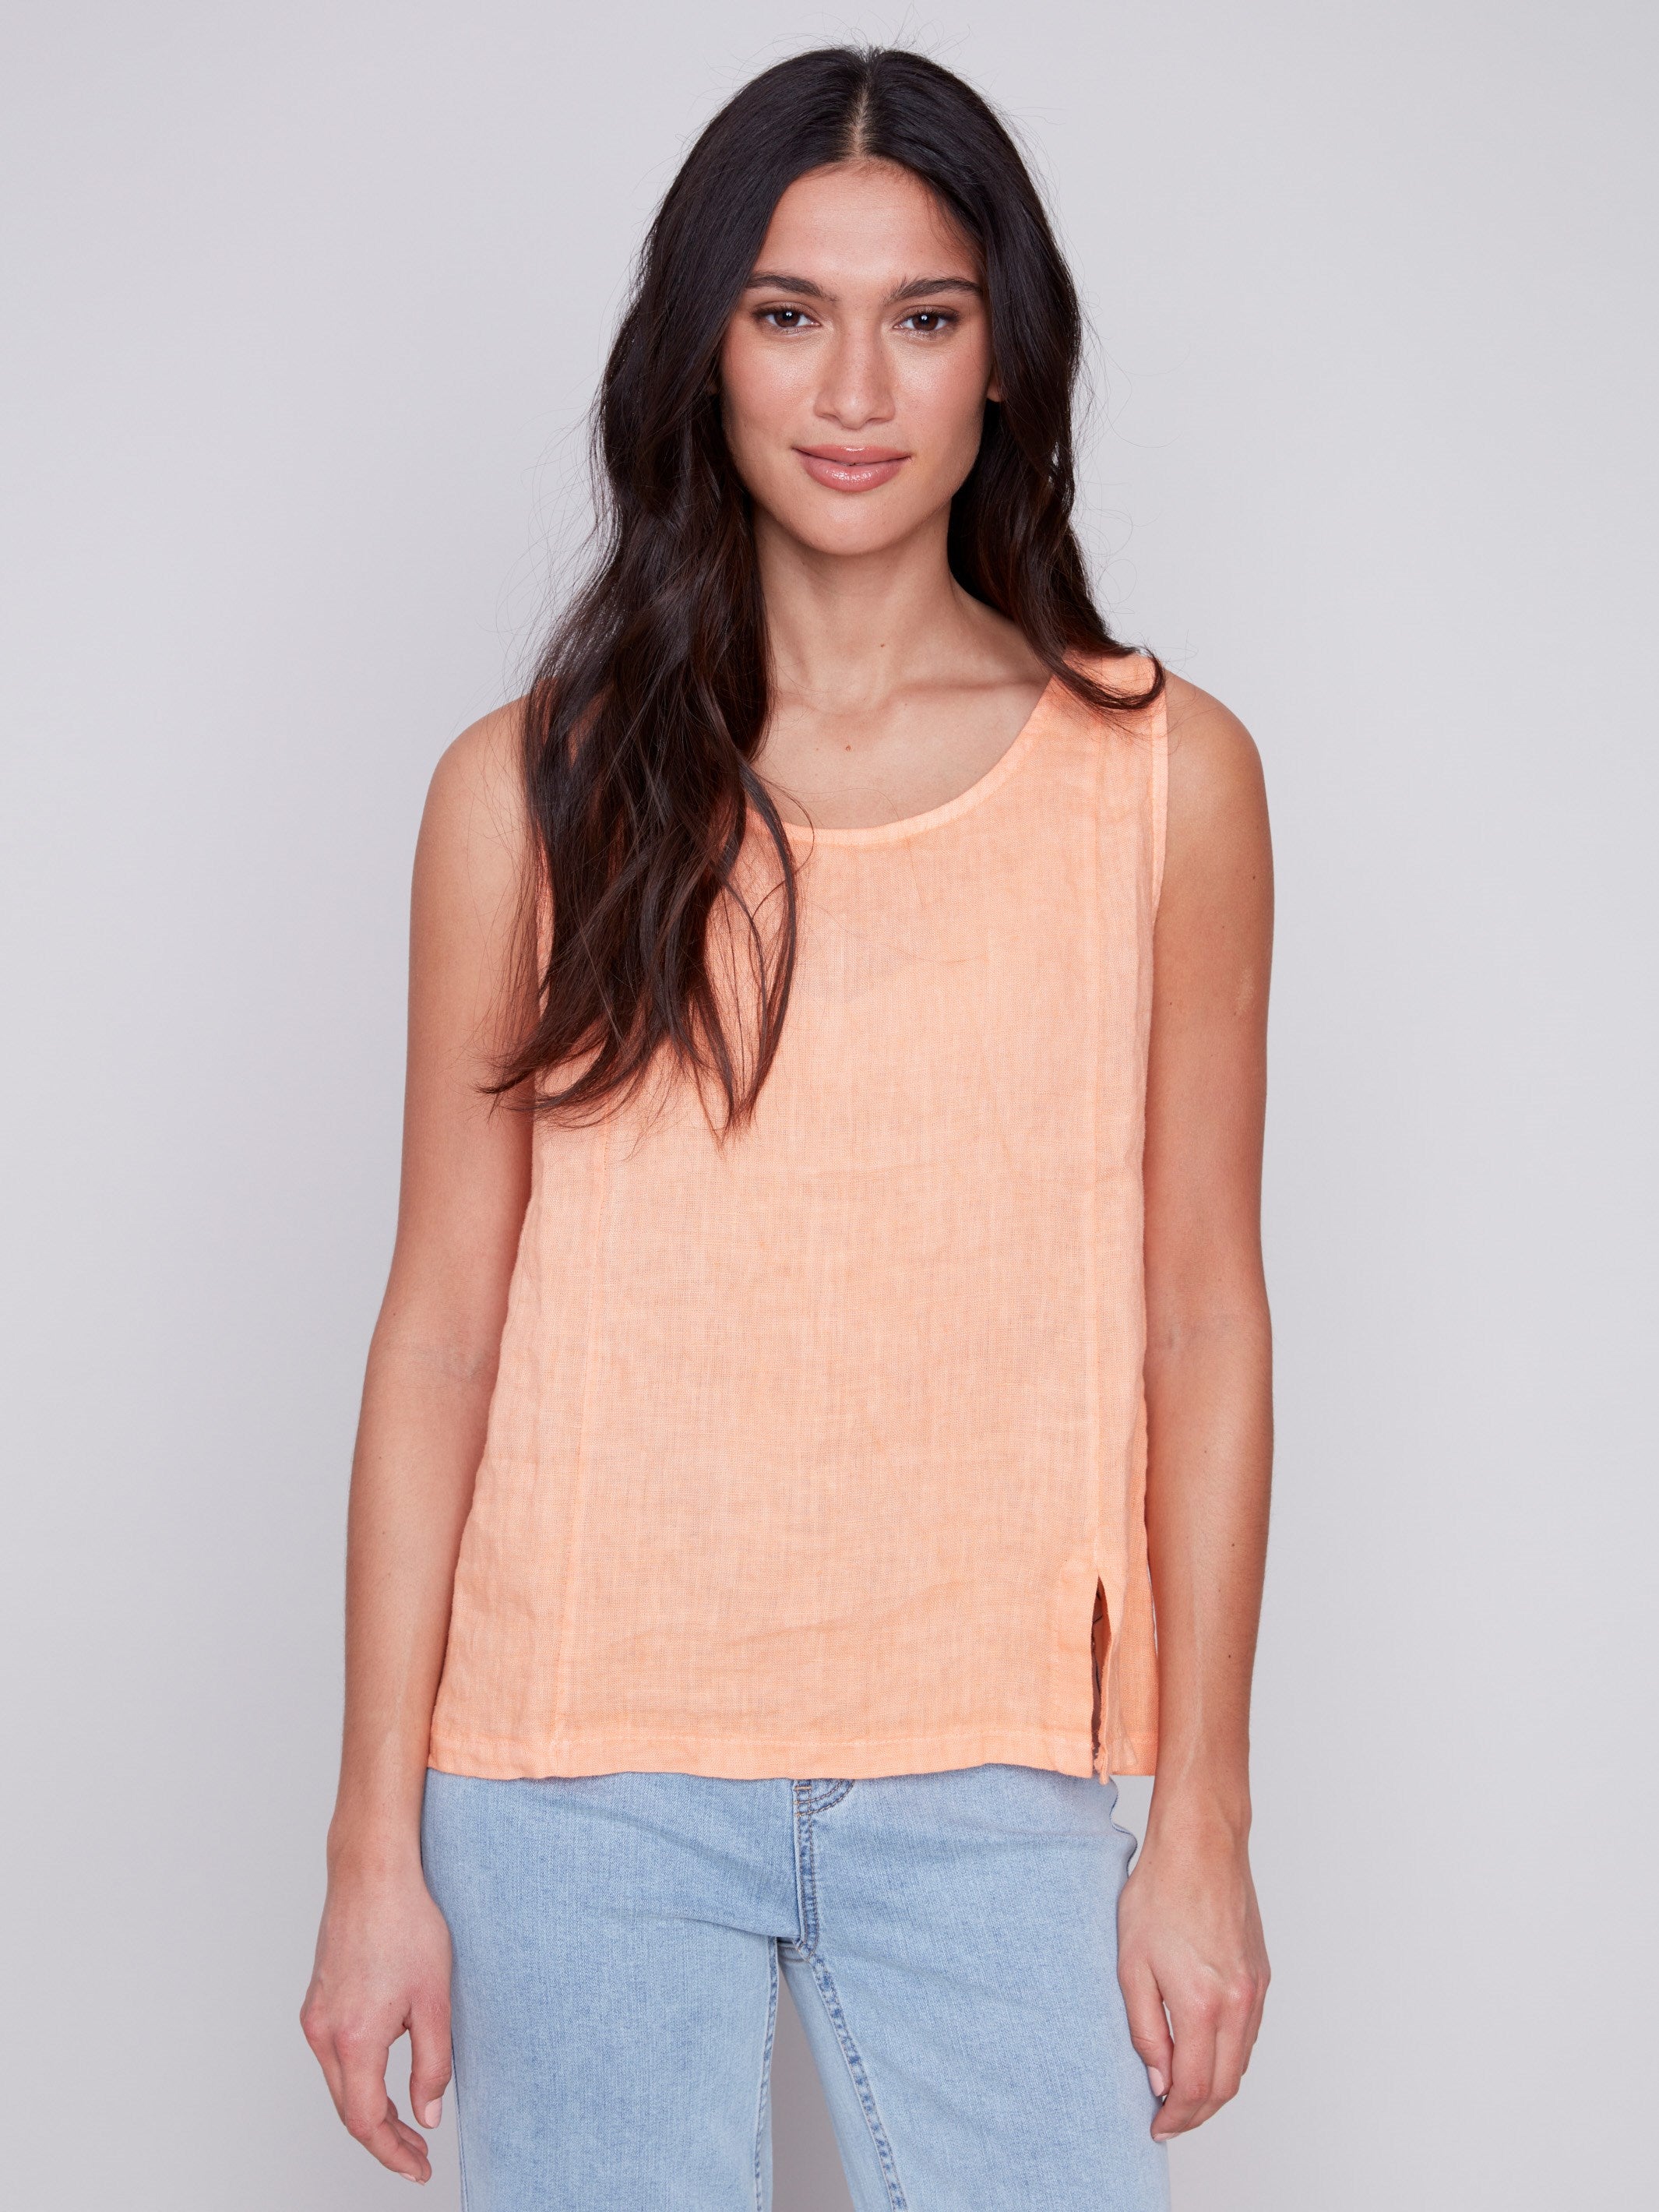 Sleeveless Linen Top with Slit - Tangerine - Charlie B Collection Canada - Image 3